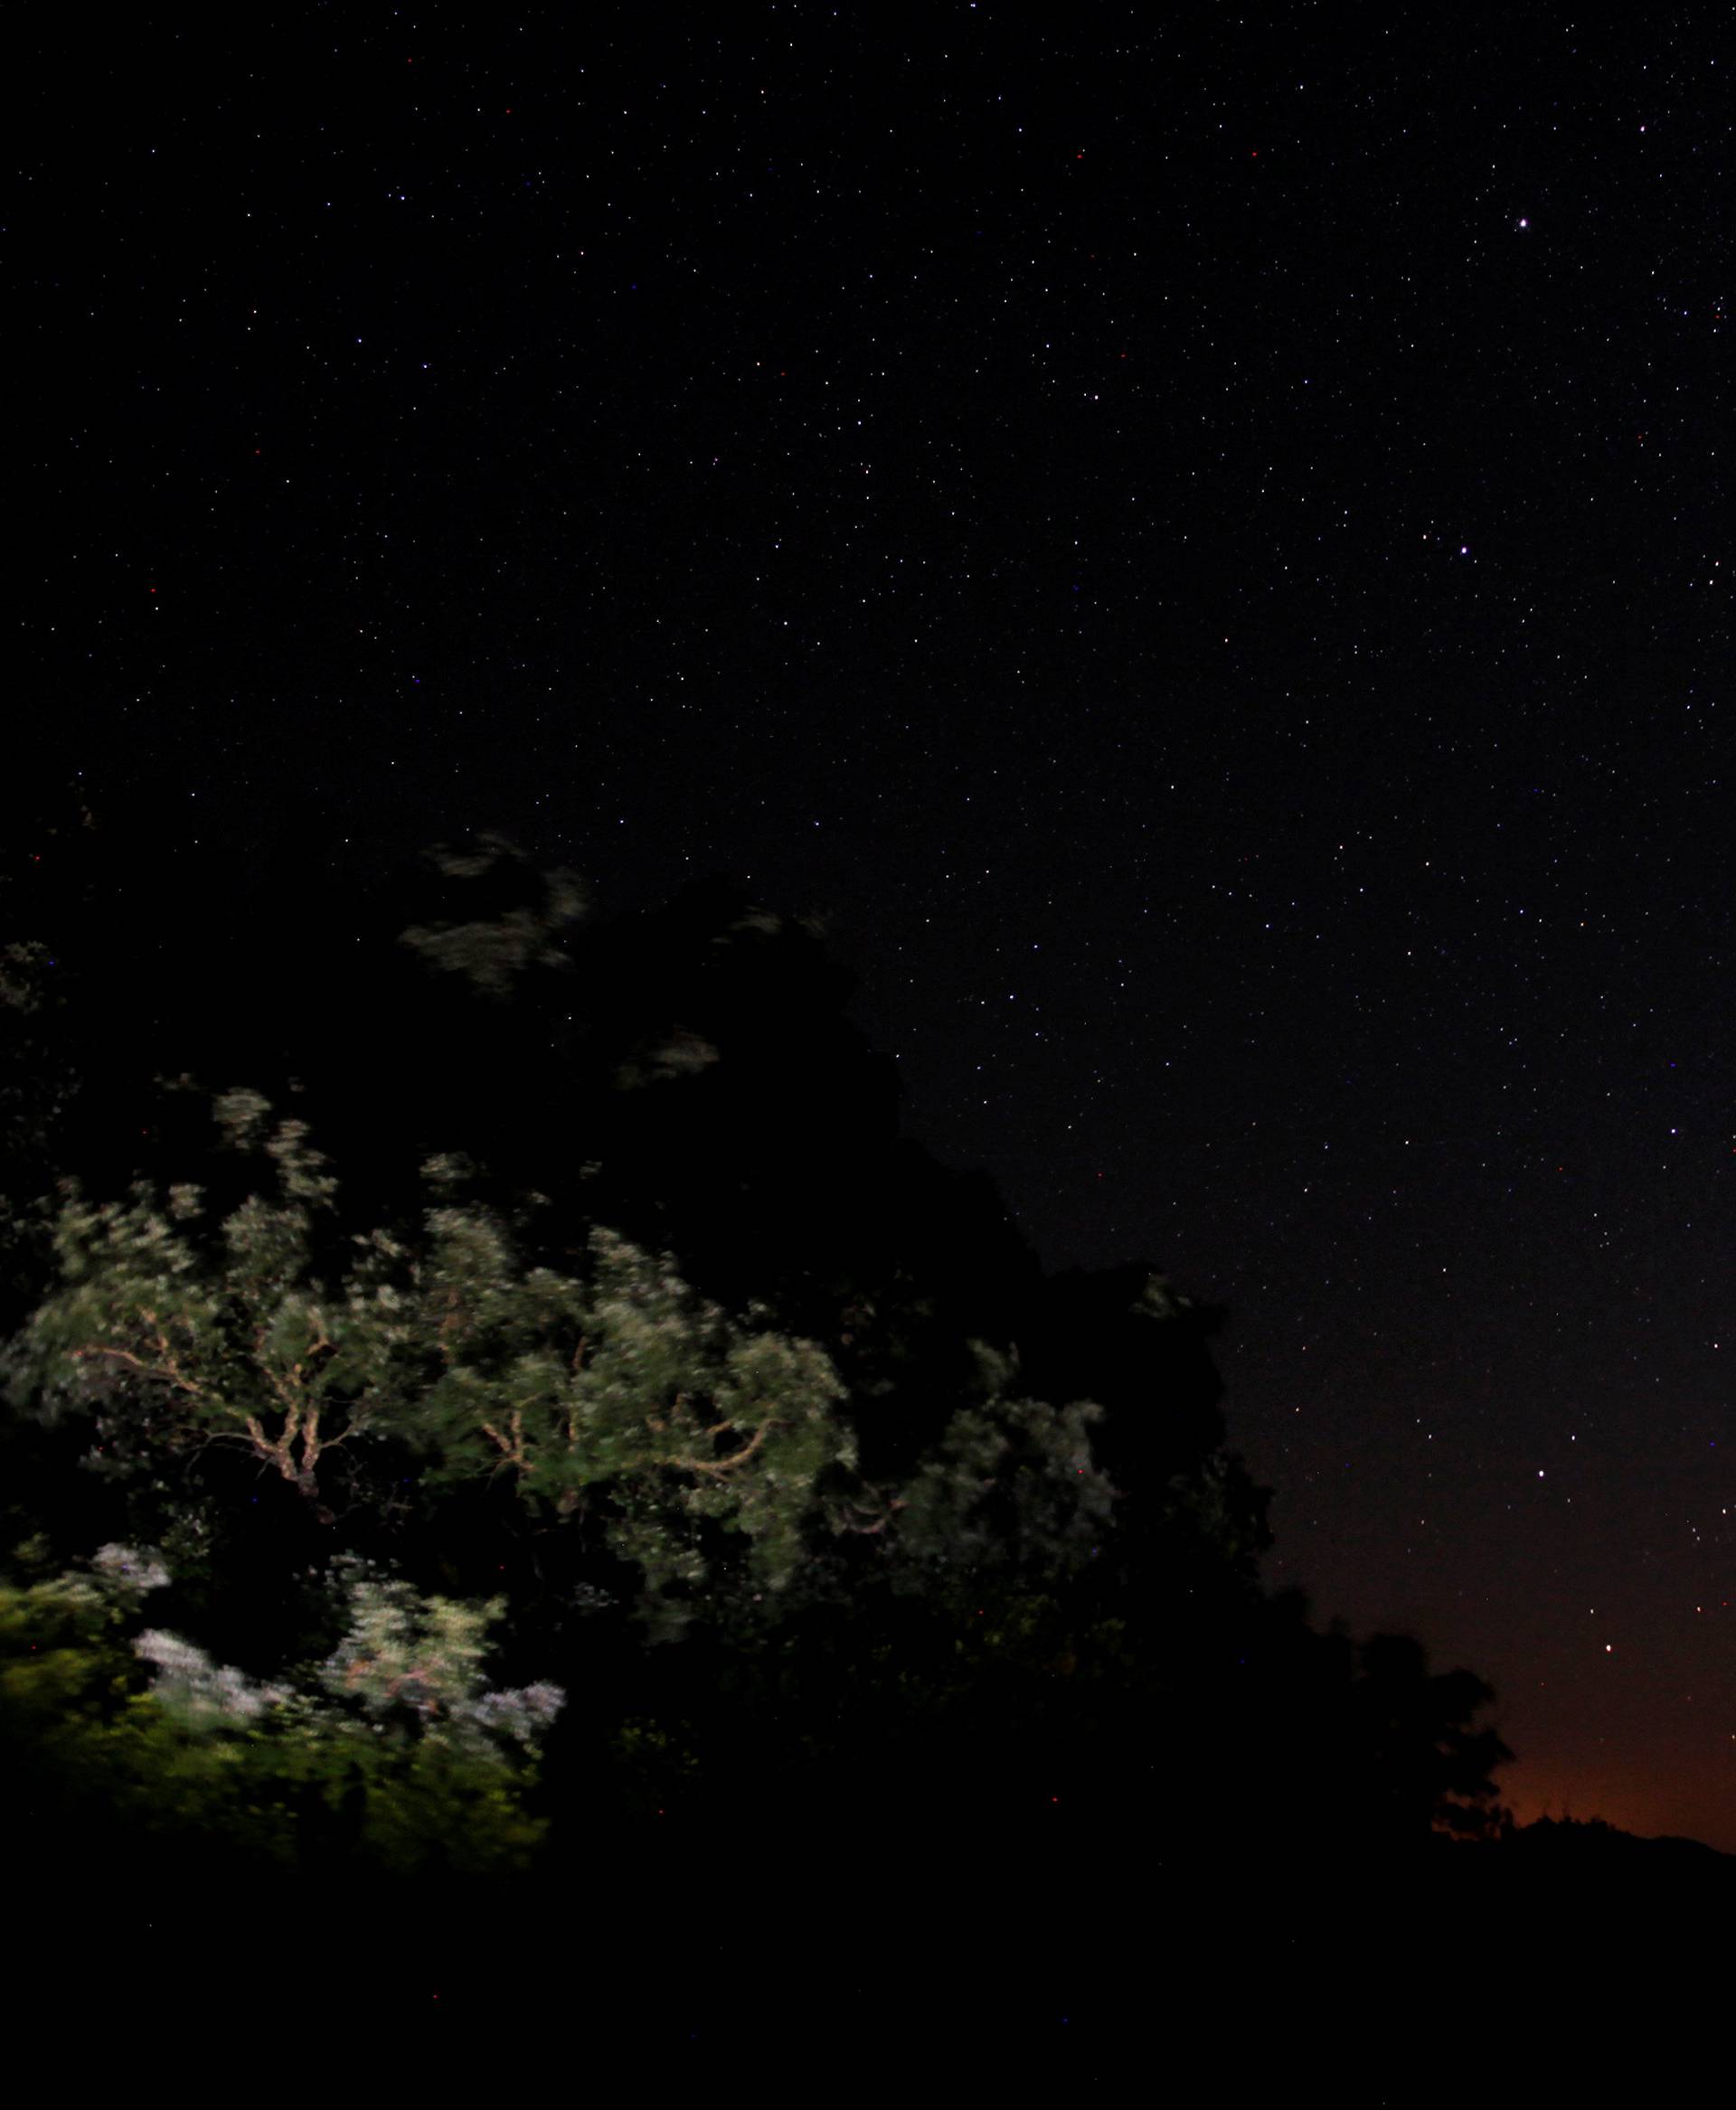 A meteor streaks past stars in the night sky above trees in the Los Alcornocales (cork oak forests) nature park, during the Perseid meteor shower in the ancient village of La Sauceda, near Cortes de la Frontera